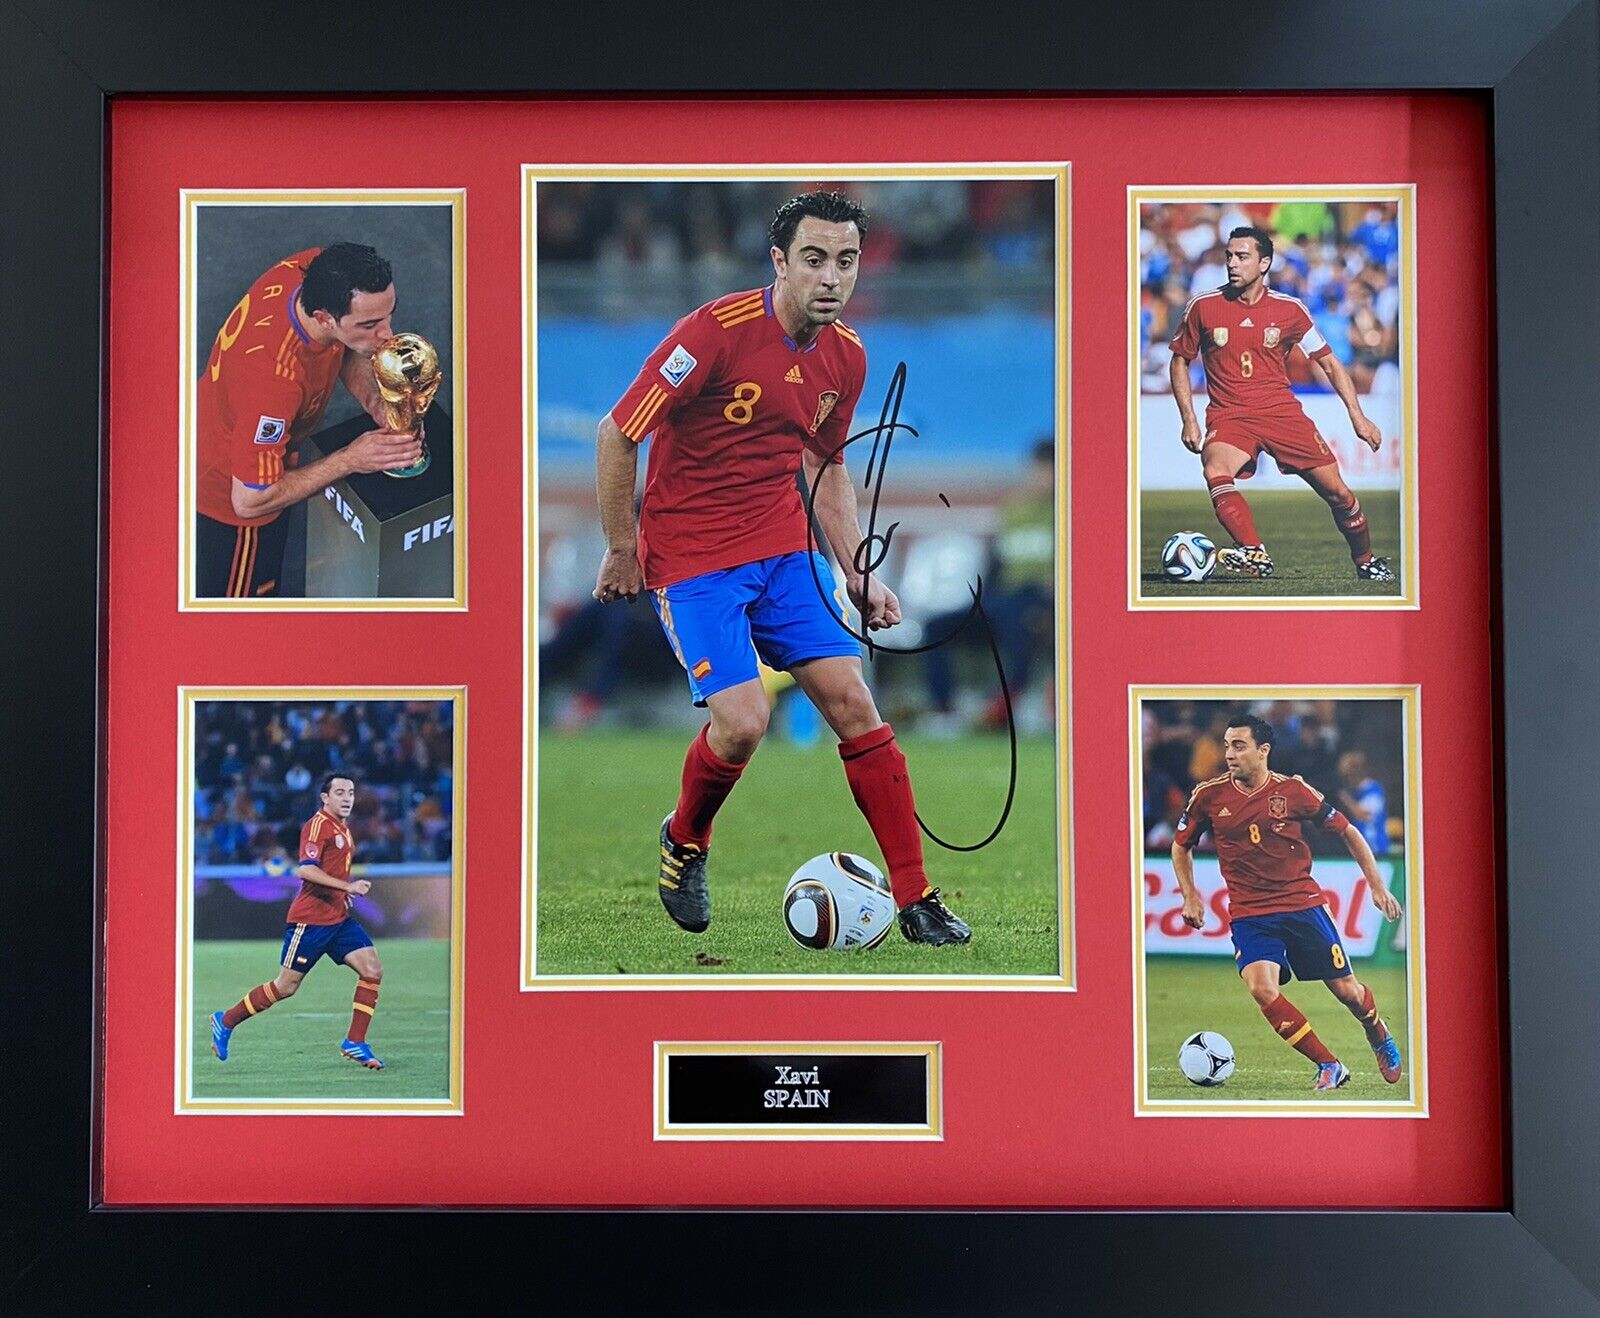 Xavi Genuine Signed Spain Photo Poster painting In 20x16 Frame Display, Barcelona, See Proof